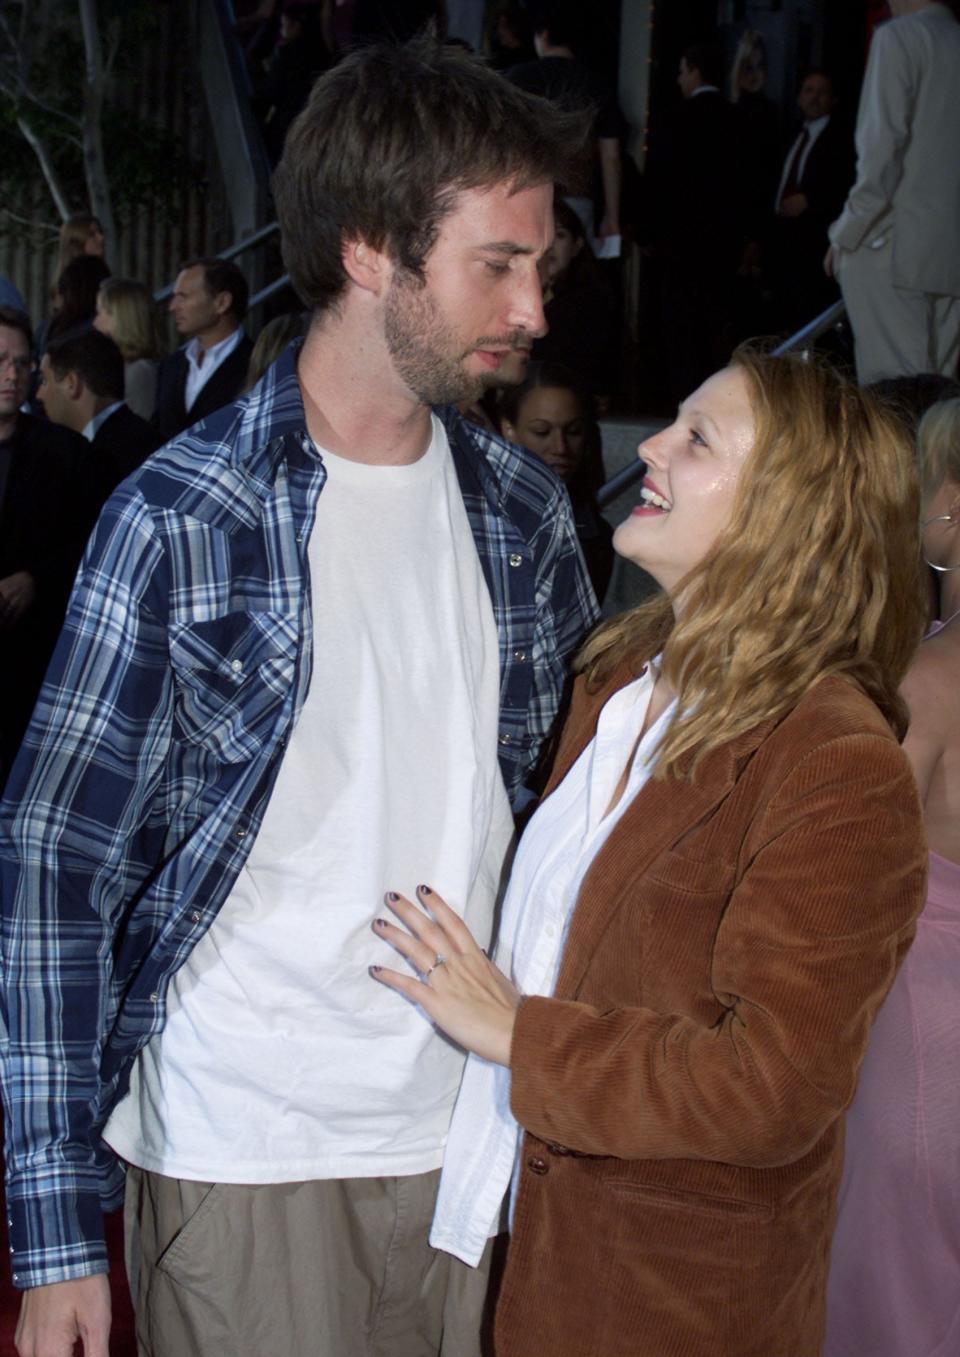 Tom Green and Drew Barrymore at the premiere of "Loser" at the Avco Theater in Los Angeles.